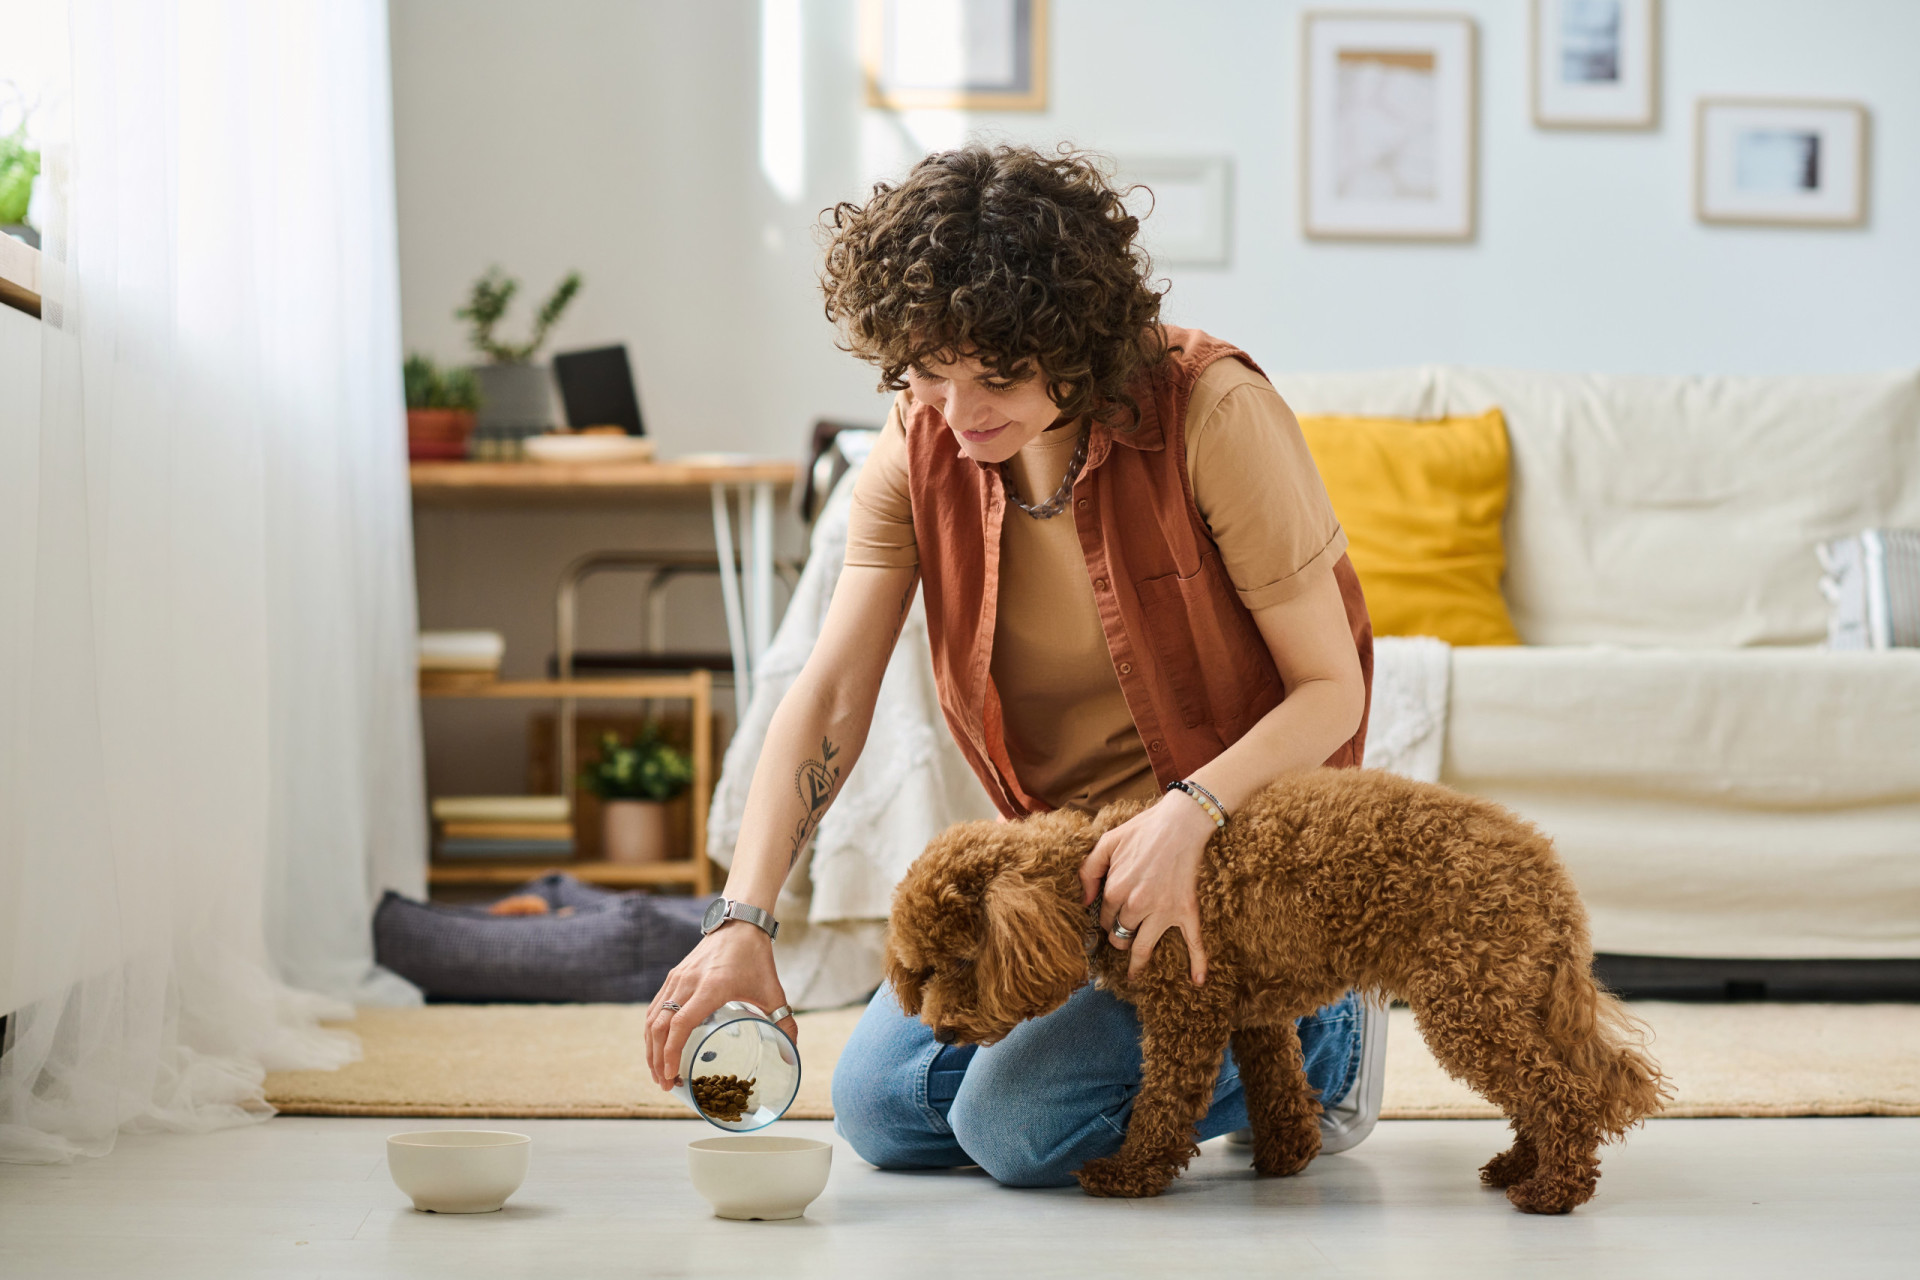 <p>If you're an animal lover, consider pet sitting! A pet sitter cares for one or more pets while their owner is away. This type of care can be provided in your home or in the owner's home.</p><p>You may also like:<a href="https://www.starsinsider.com/n/383003?utm_source=msn.com&utm_medium=display&utm_campaign=referral_description&utm_content=670061en-en"> Celebrities who have been body shamed</a></p>